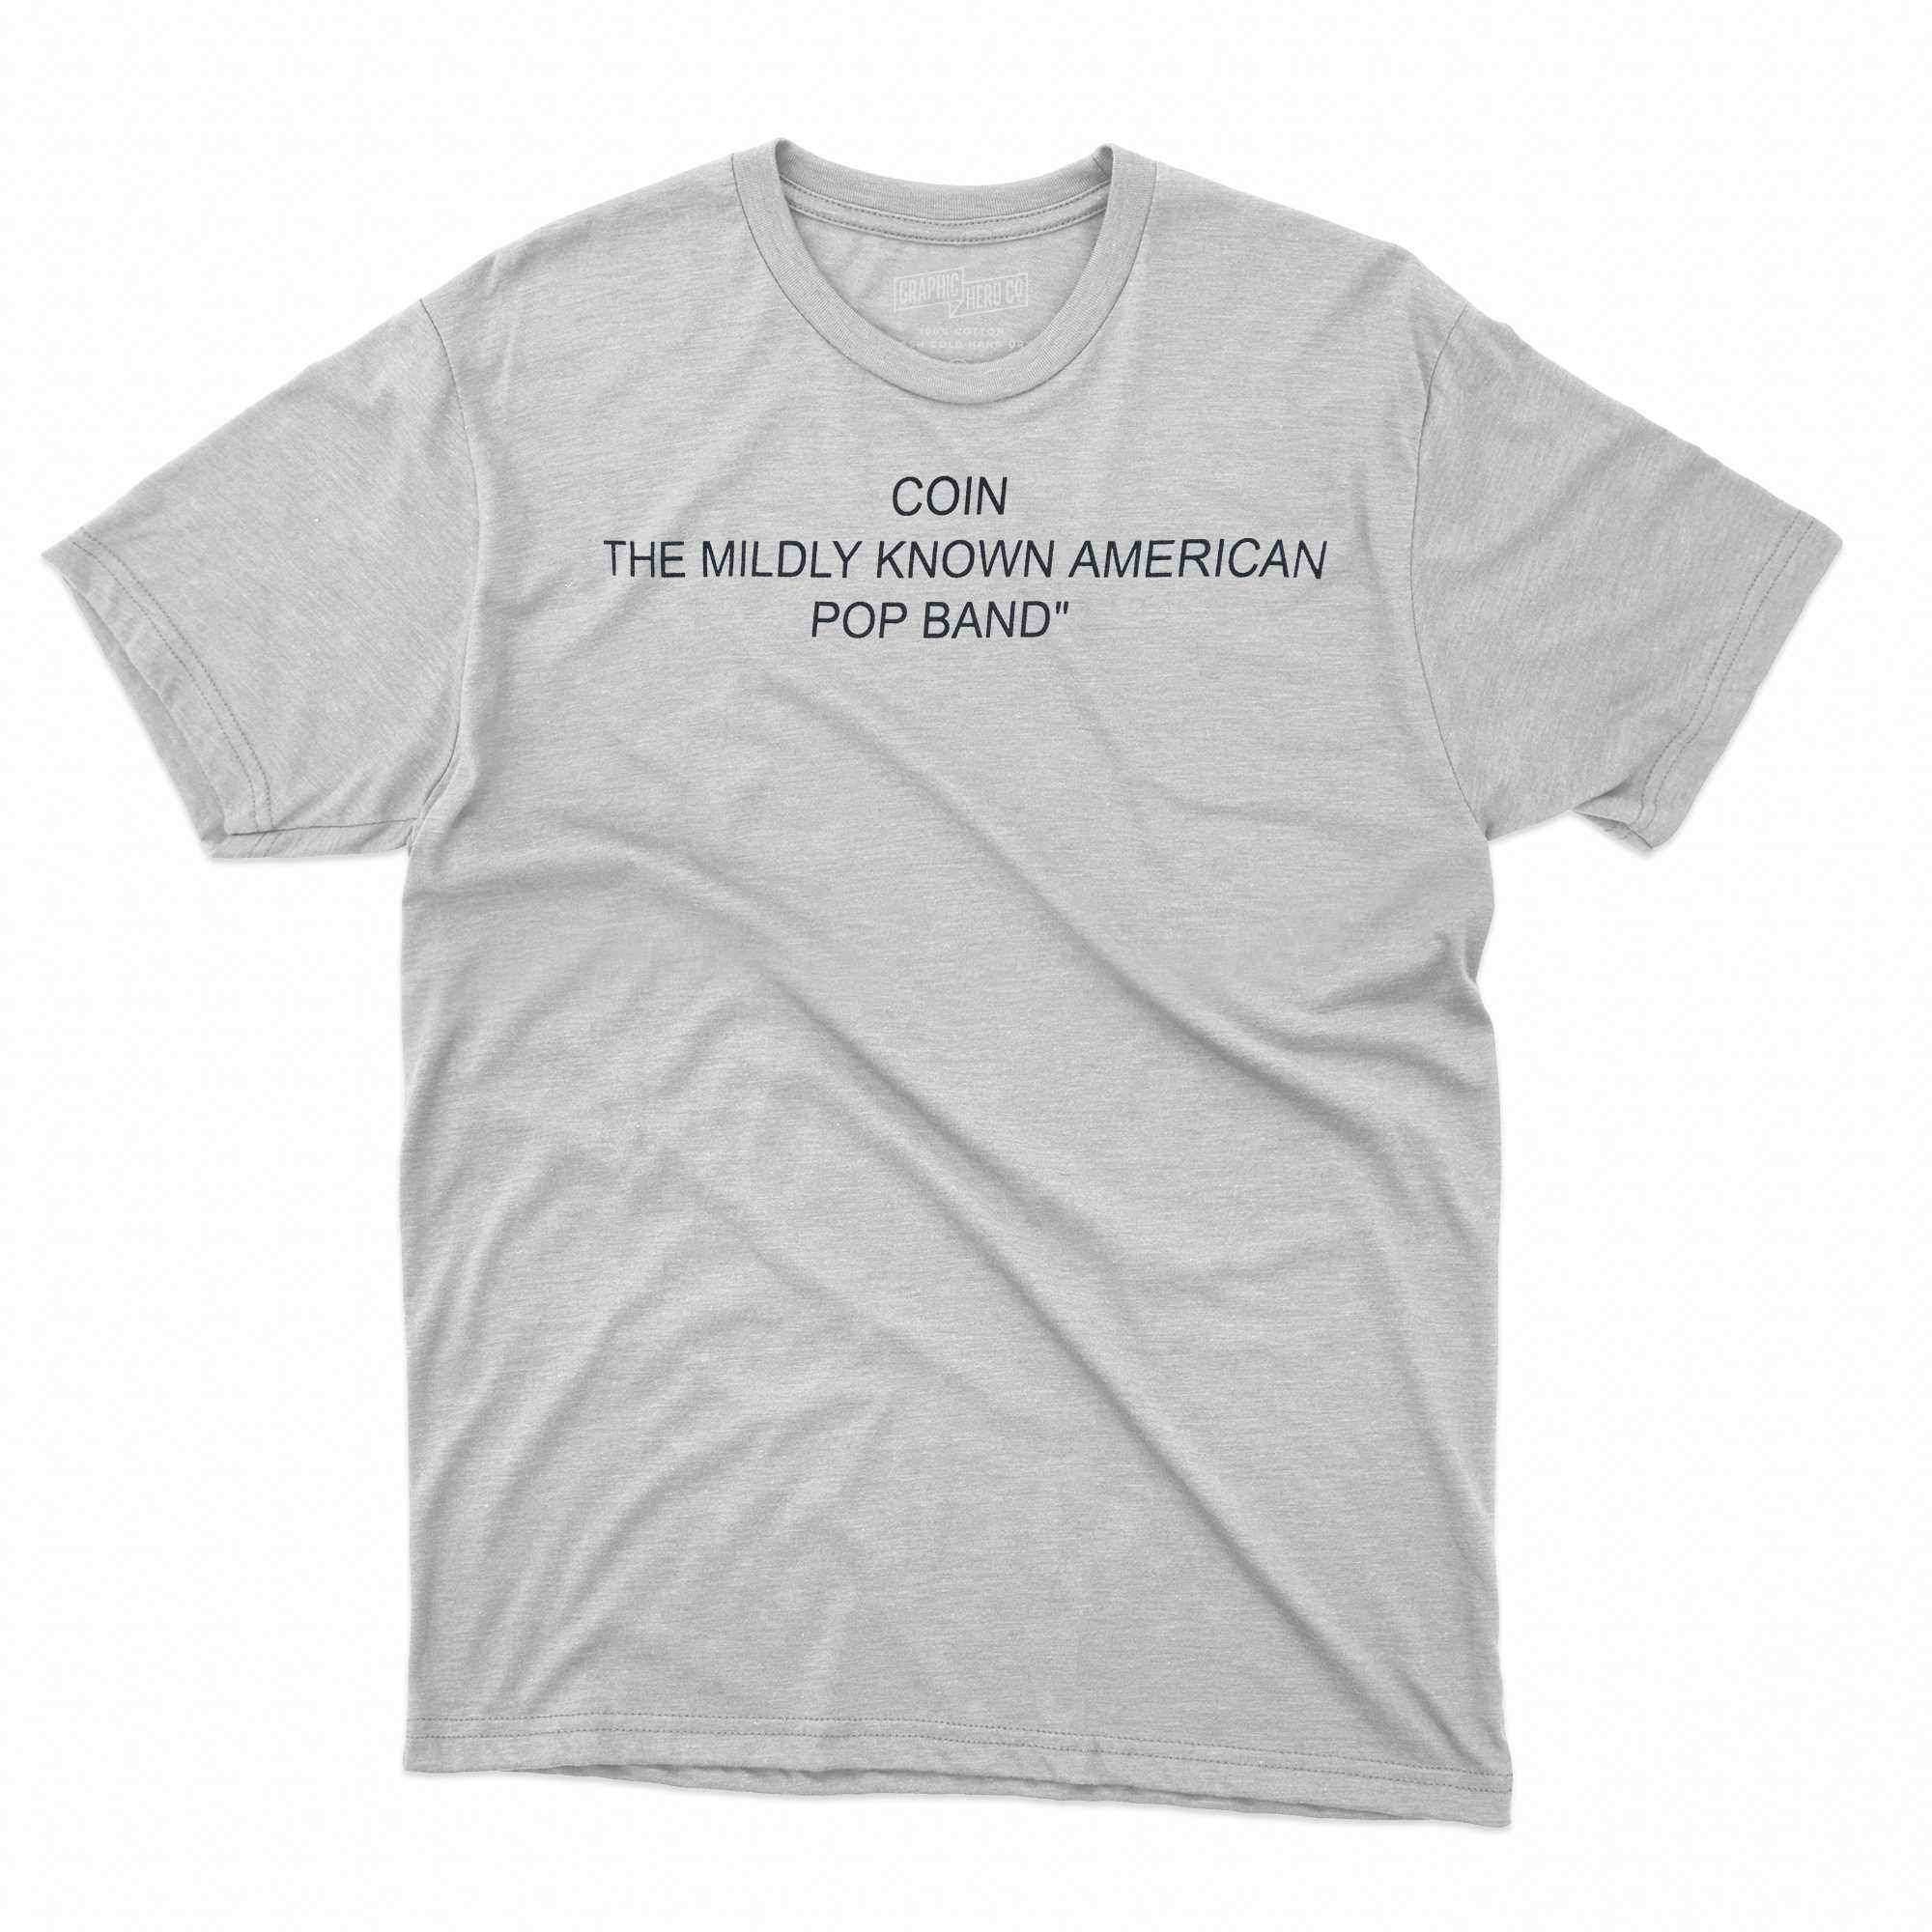 coin the mildly known american pop band shirt 1